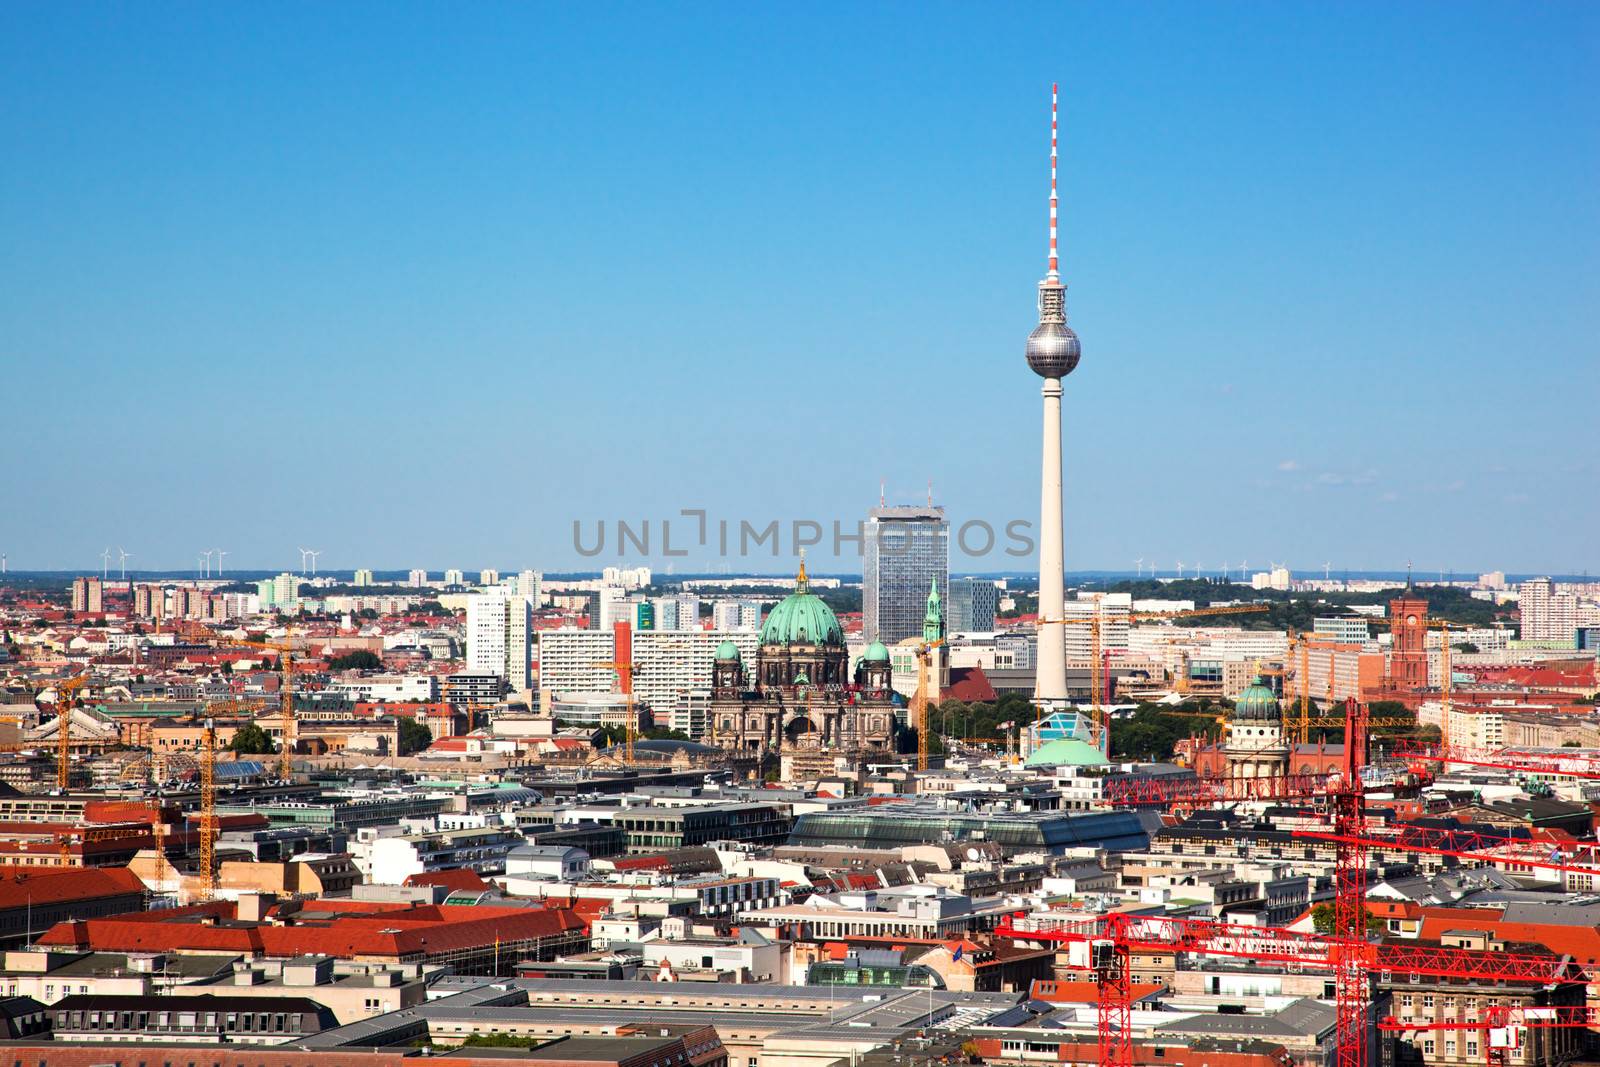 Berlin panorama. Top view on Television Tower, Berlin Cathedral - German Berliner Dom